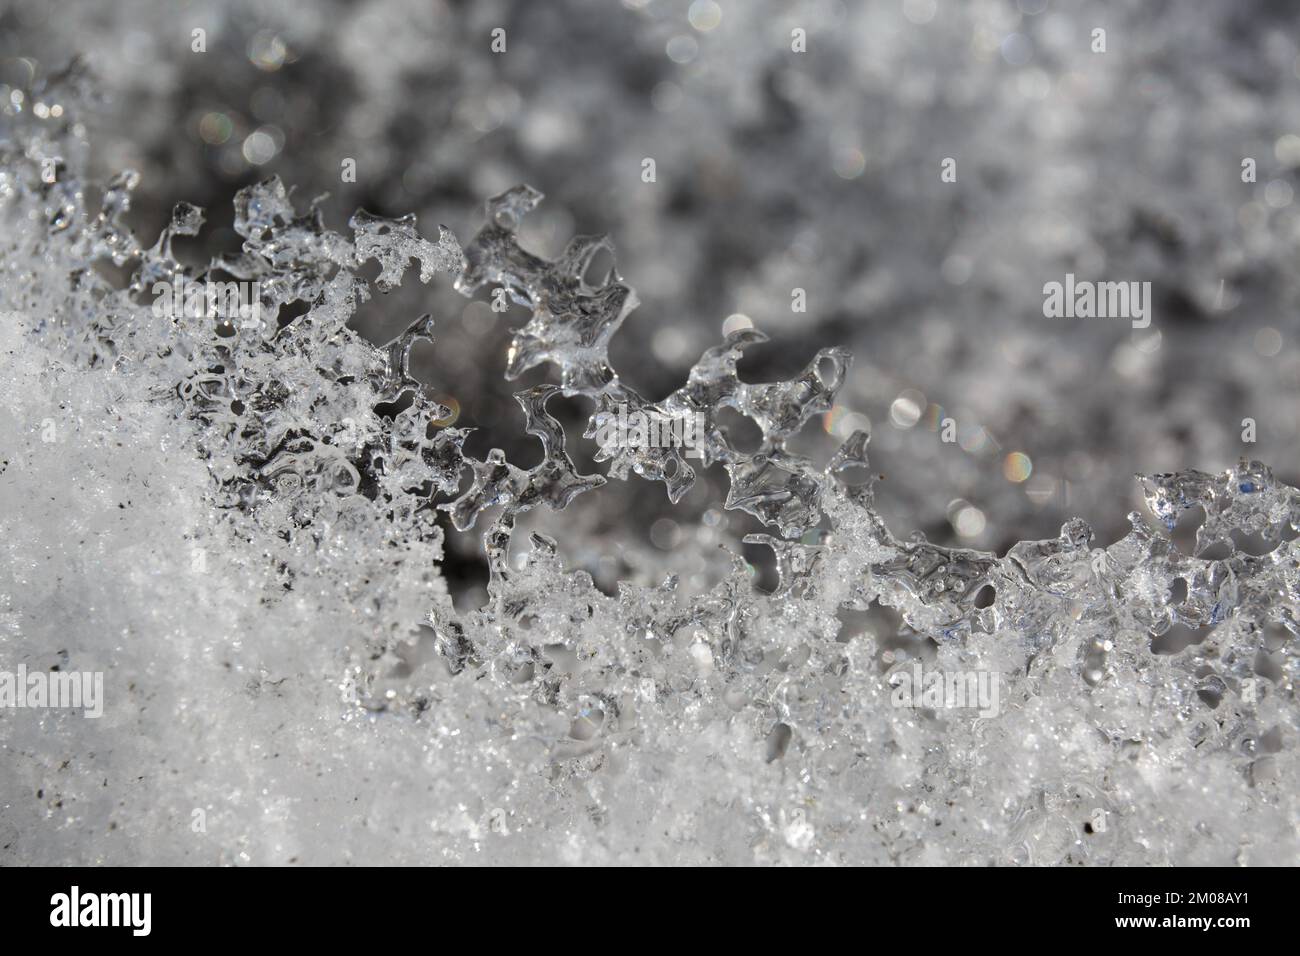 ice texture, melting snow, icing. Frozen snowflakes, icicles and a river water. Ice formations Stock Photo